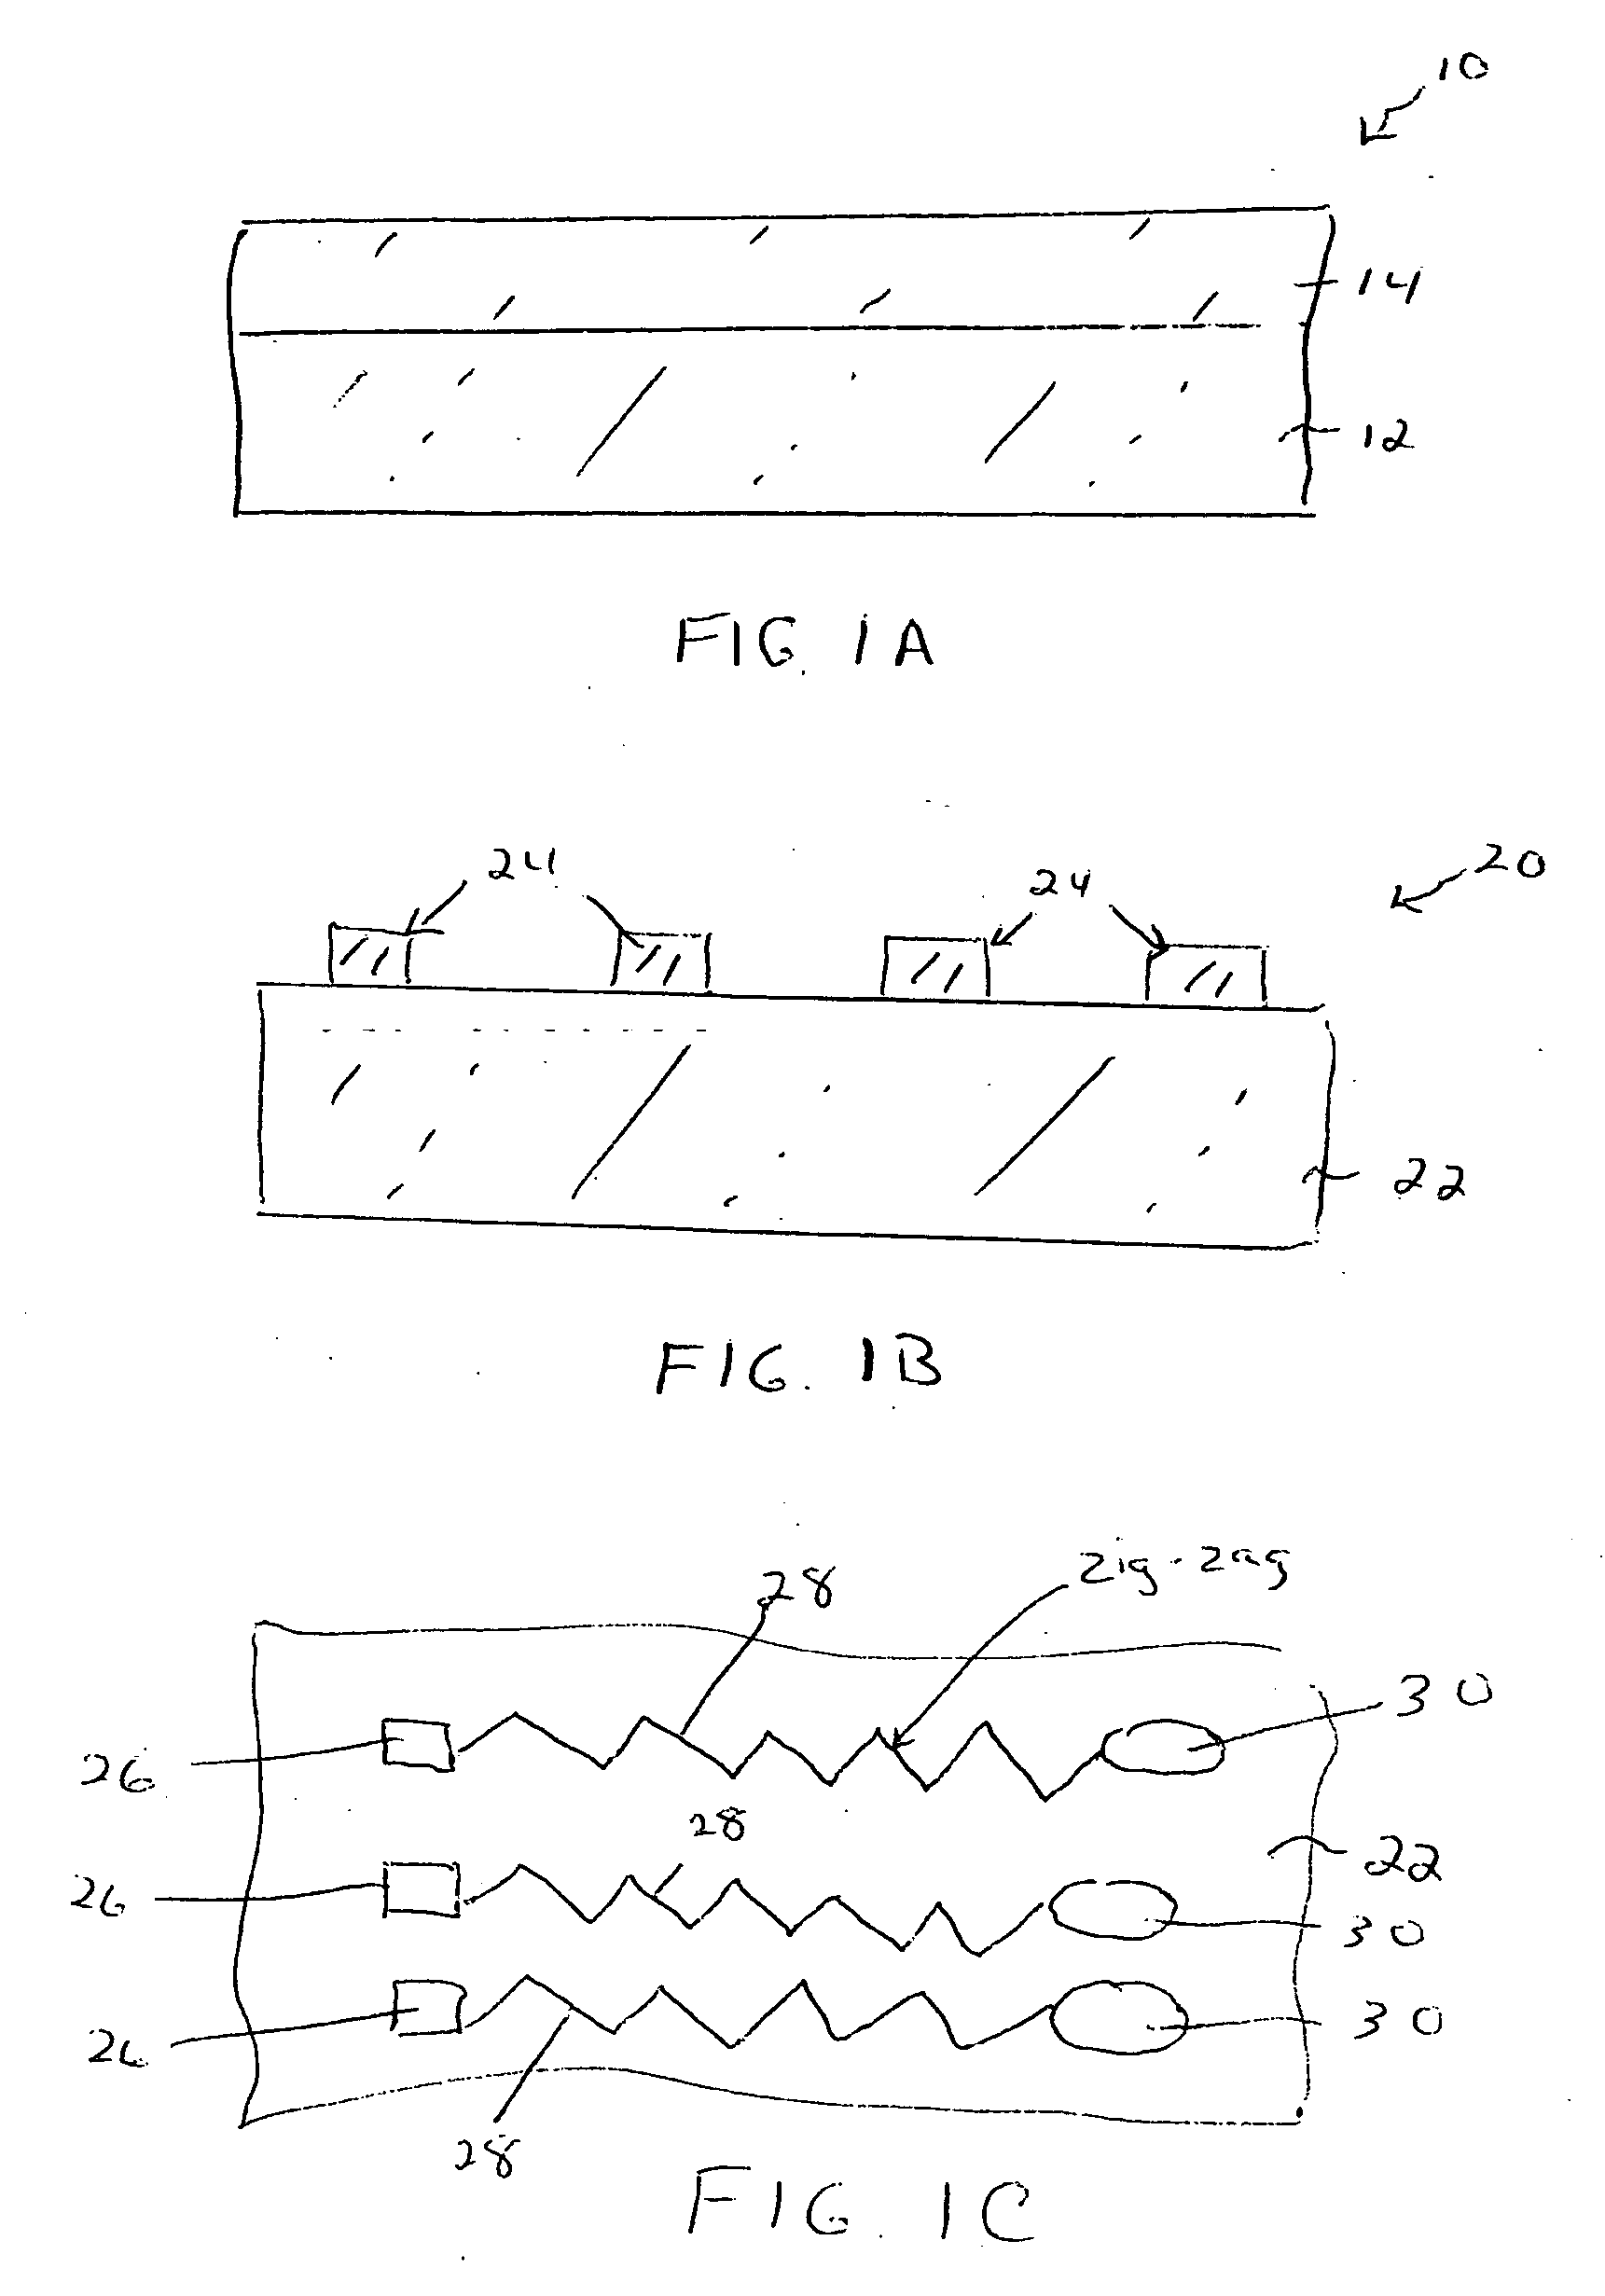 Method for producing flexible, stretchable, and implantable high-density microelectrode arrays